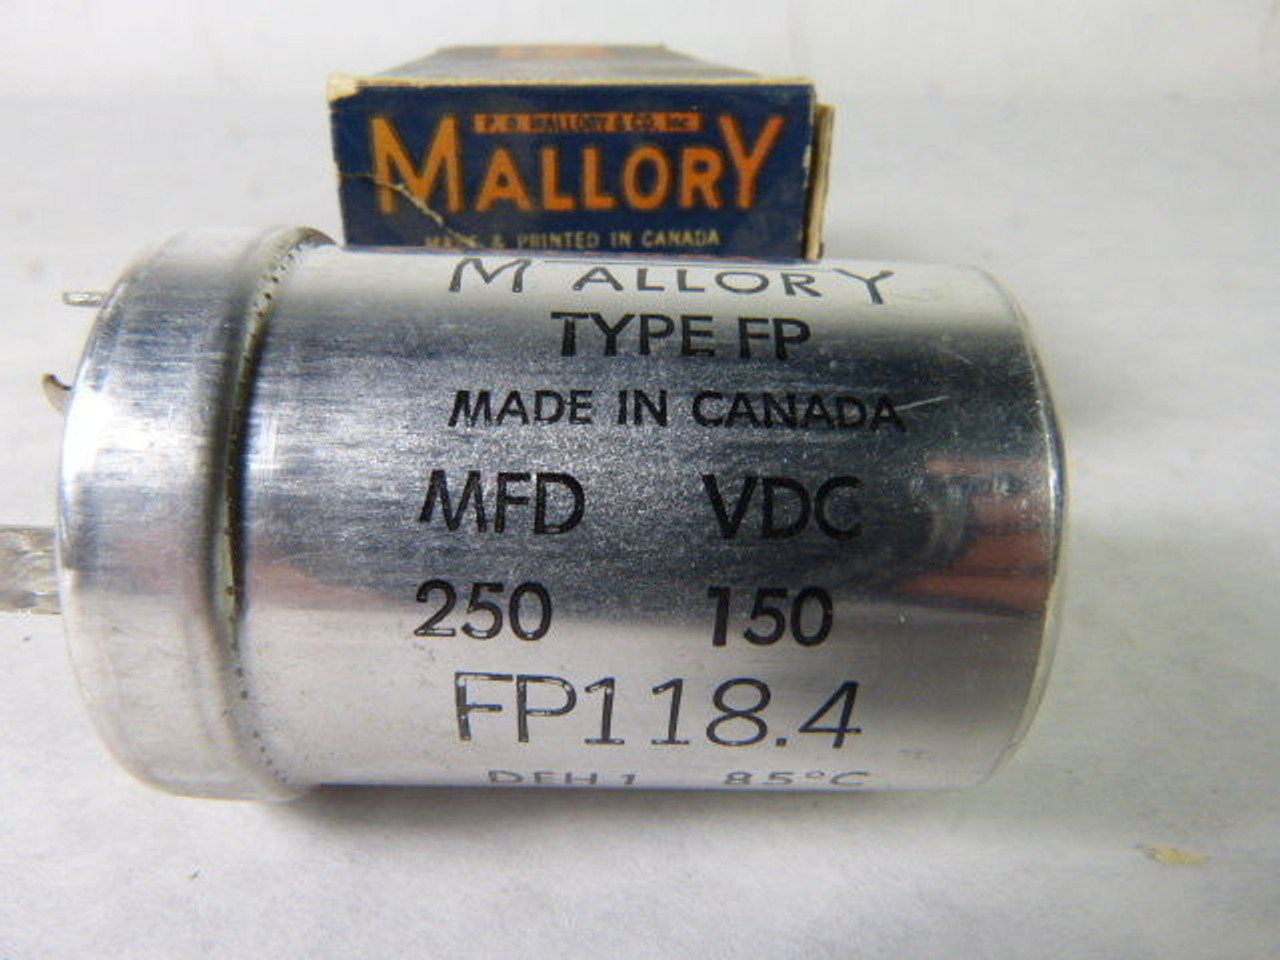 Mallory FP-118.4 Capacitor 250mfd 150VDC ! NEW !